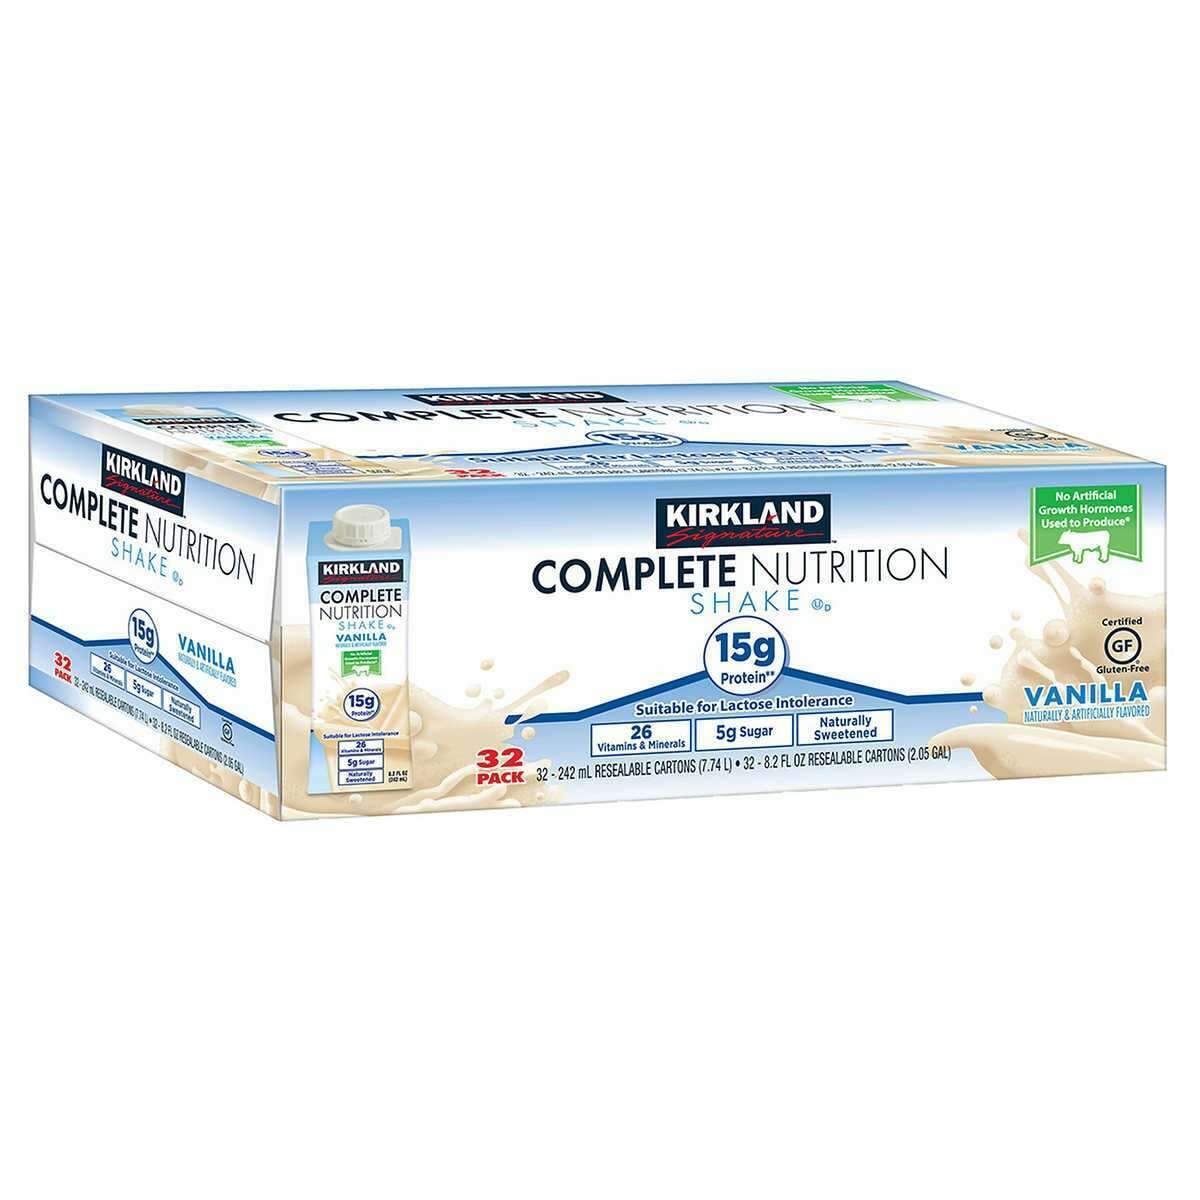 Primary image for Kirkland Signature Complete Nutrition Shakes, 8.2 fl. oz., 32-pack